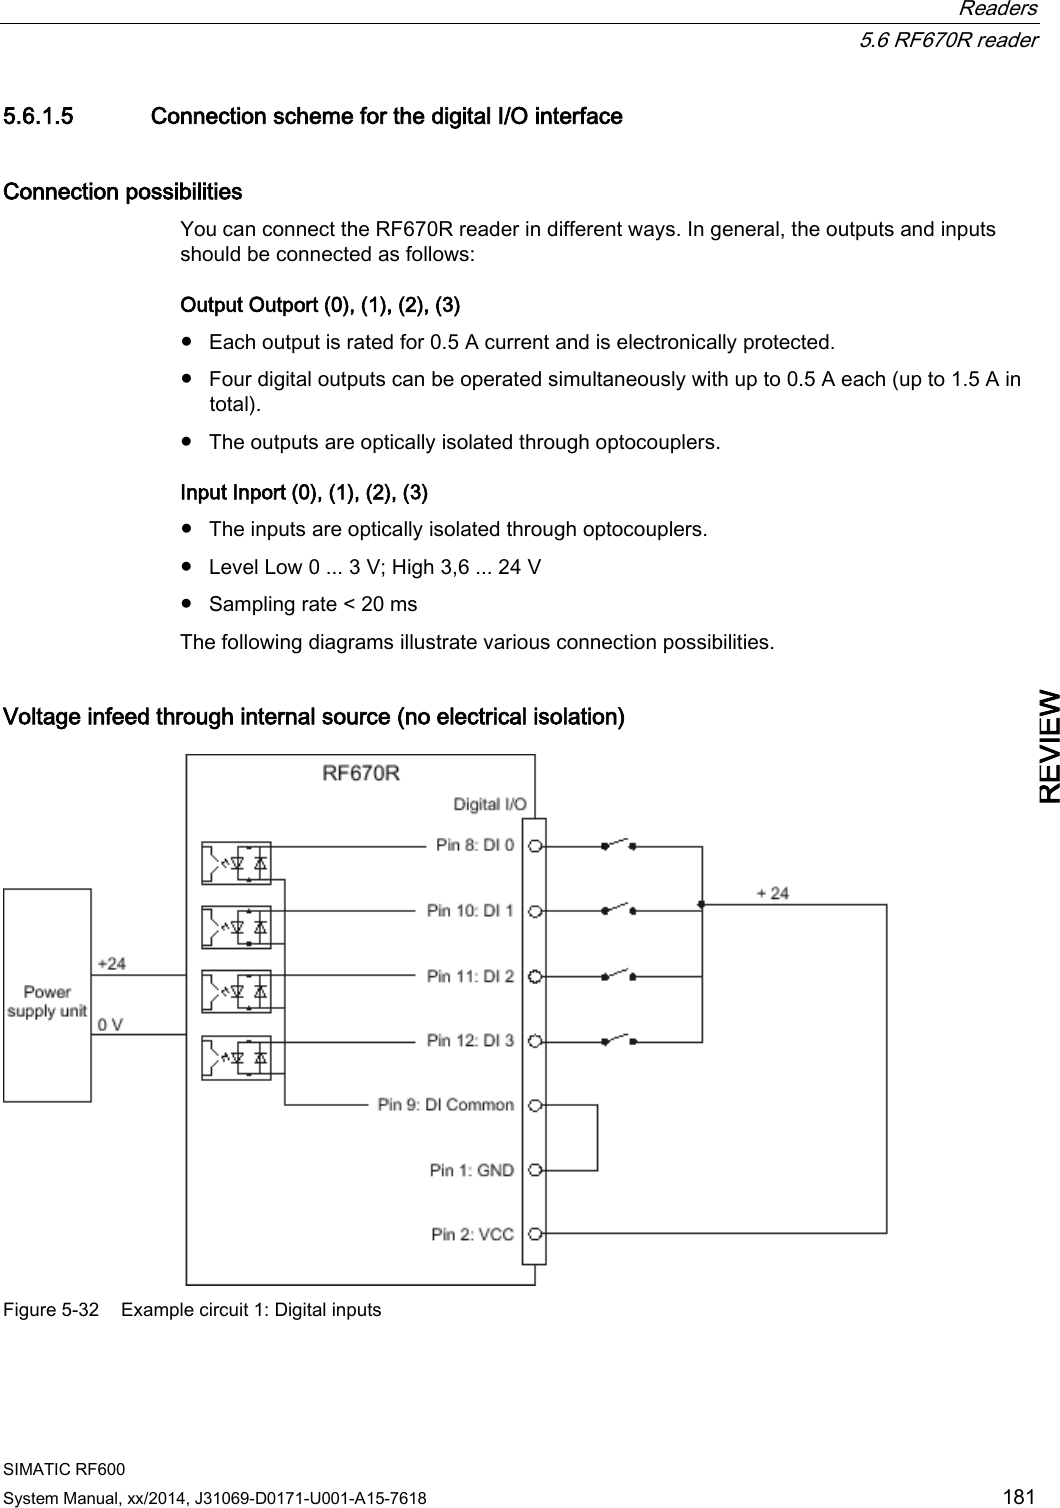  Readers  5.6 RF670R reader SIMATIC RF600 System Manual, xx/2014, J31069-D0171-U001-A15-7618 181 REVIEW 5.6.1.5 Connection scheme for the digital I/O interface Connection possibilities You can connect the RF670R reader in different ways. In general, the outputs and inputs should be connected as follows: Output Outport (0), (1), (2), (3) ● Each output is rated for 0.5 A current and is electronically protected. ● Four digital outputs can be operated simultaneously with up to 0.5 A each (up to 1.5 A in total). ● The outputs are optically isolated through optocouplers. Input Inport (0), (1), (2), (3) ● The inputs are optically isolated through optocouplers. ● Level Low 0 ... 3 V; High 3,6 ... 24 V ● Sampling rate &lt; 20 ms The following diagrams illustrate various connection possibilities. Voltage infeed through internal source (no electrical isolation)  Figure 5-32 Example circuit 1: Digital inputs 